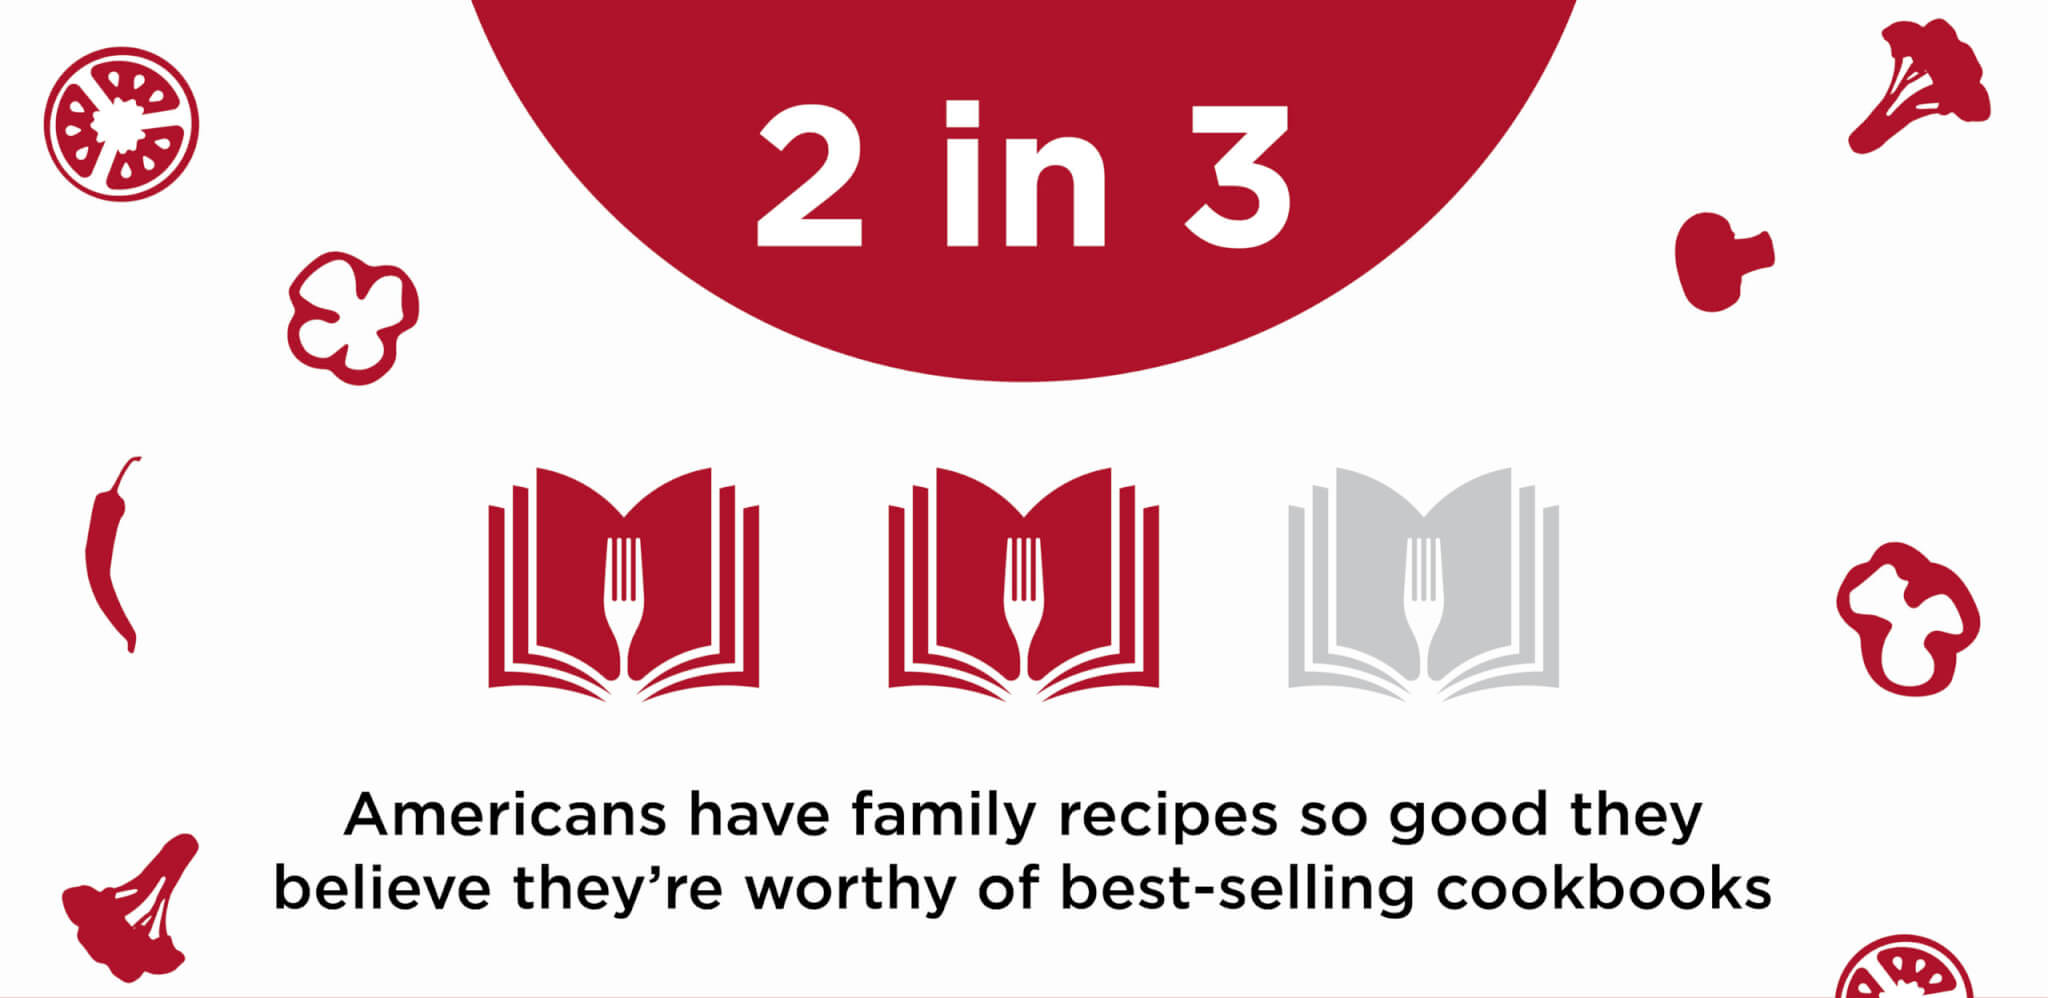 INFOGRAPHIC 2 in 3 believe their family recipes are worthy of best-selling cookbooks